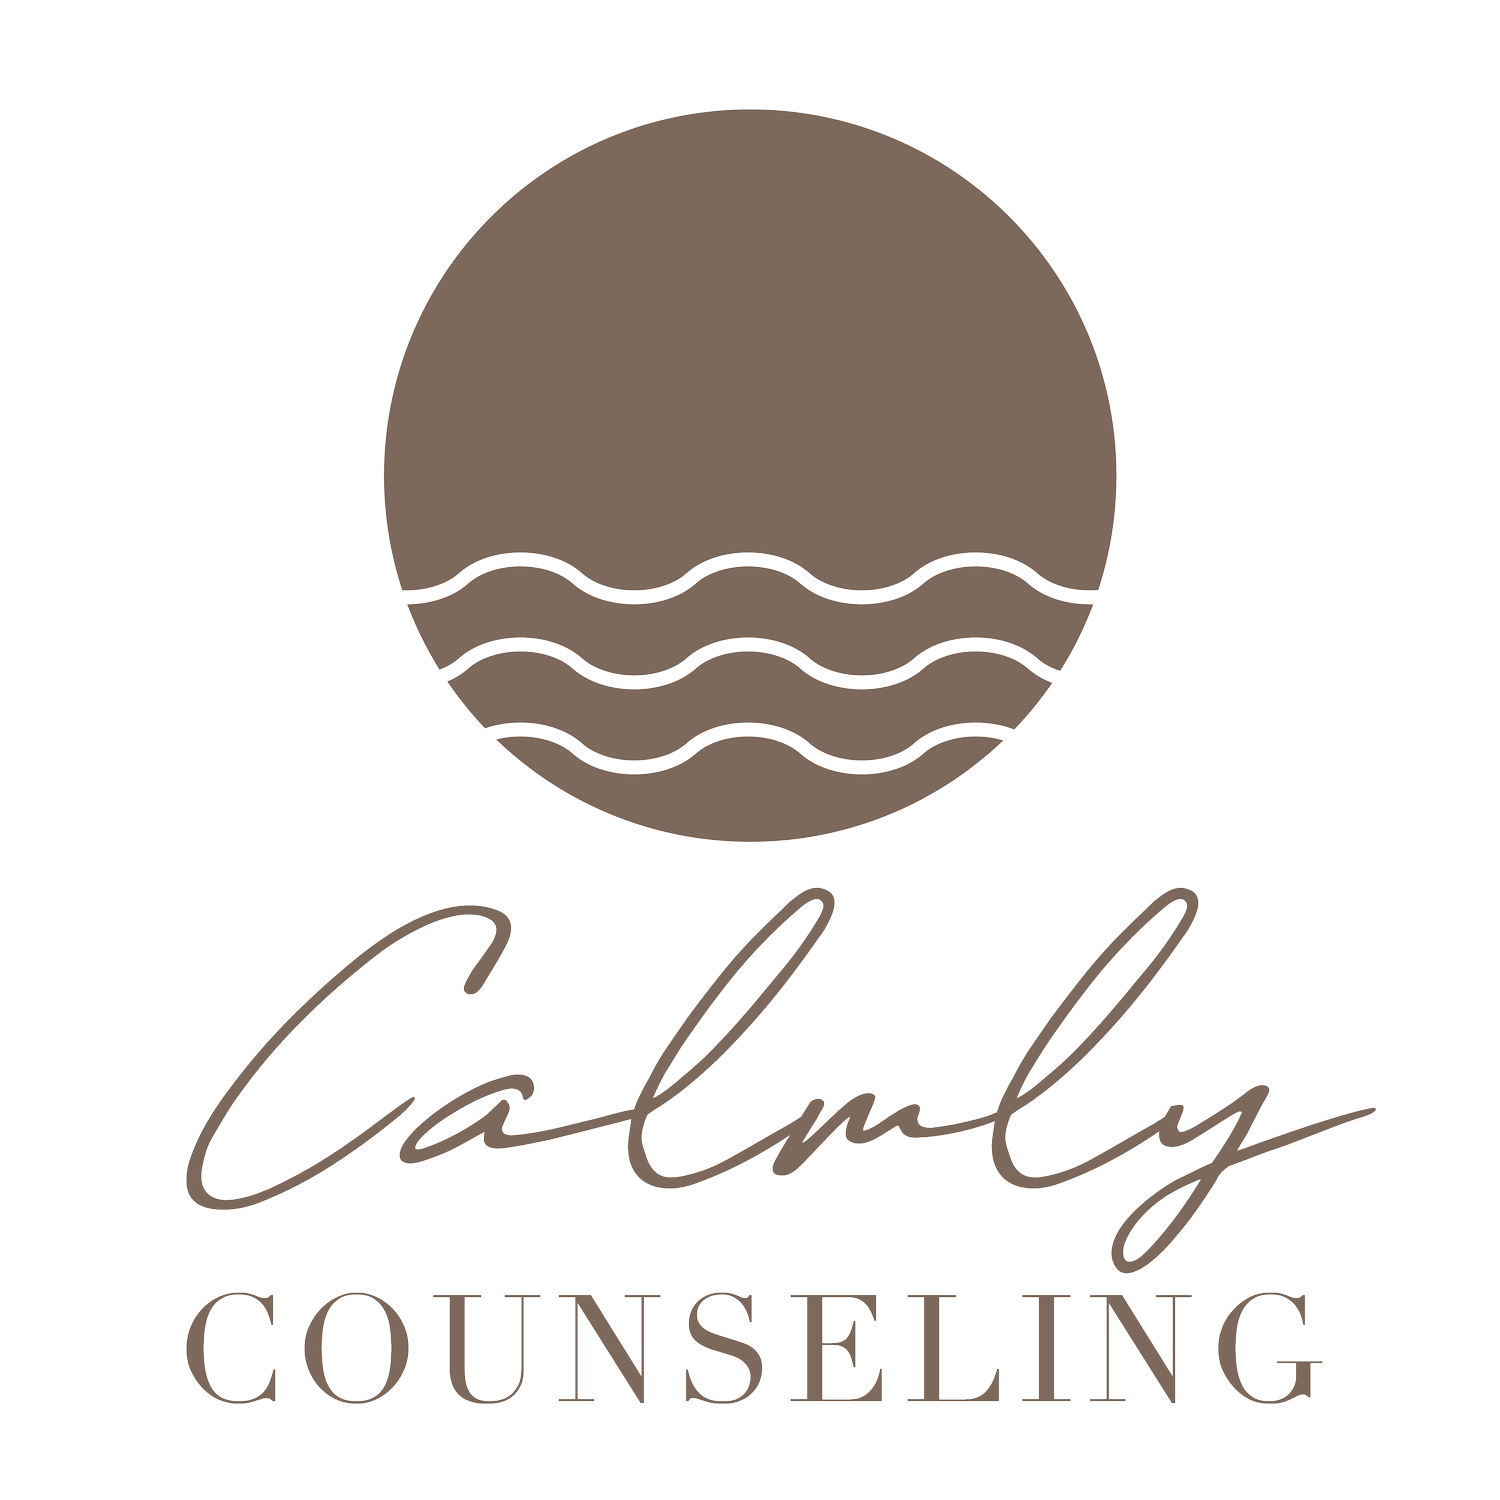 Calmly Counseling